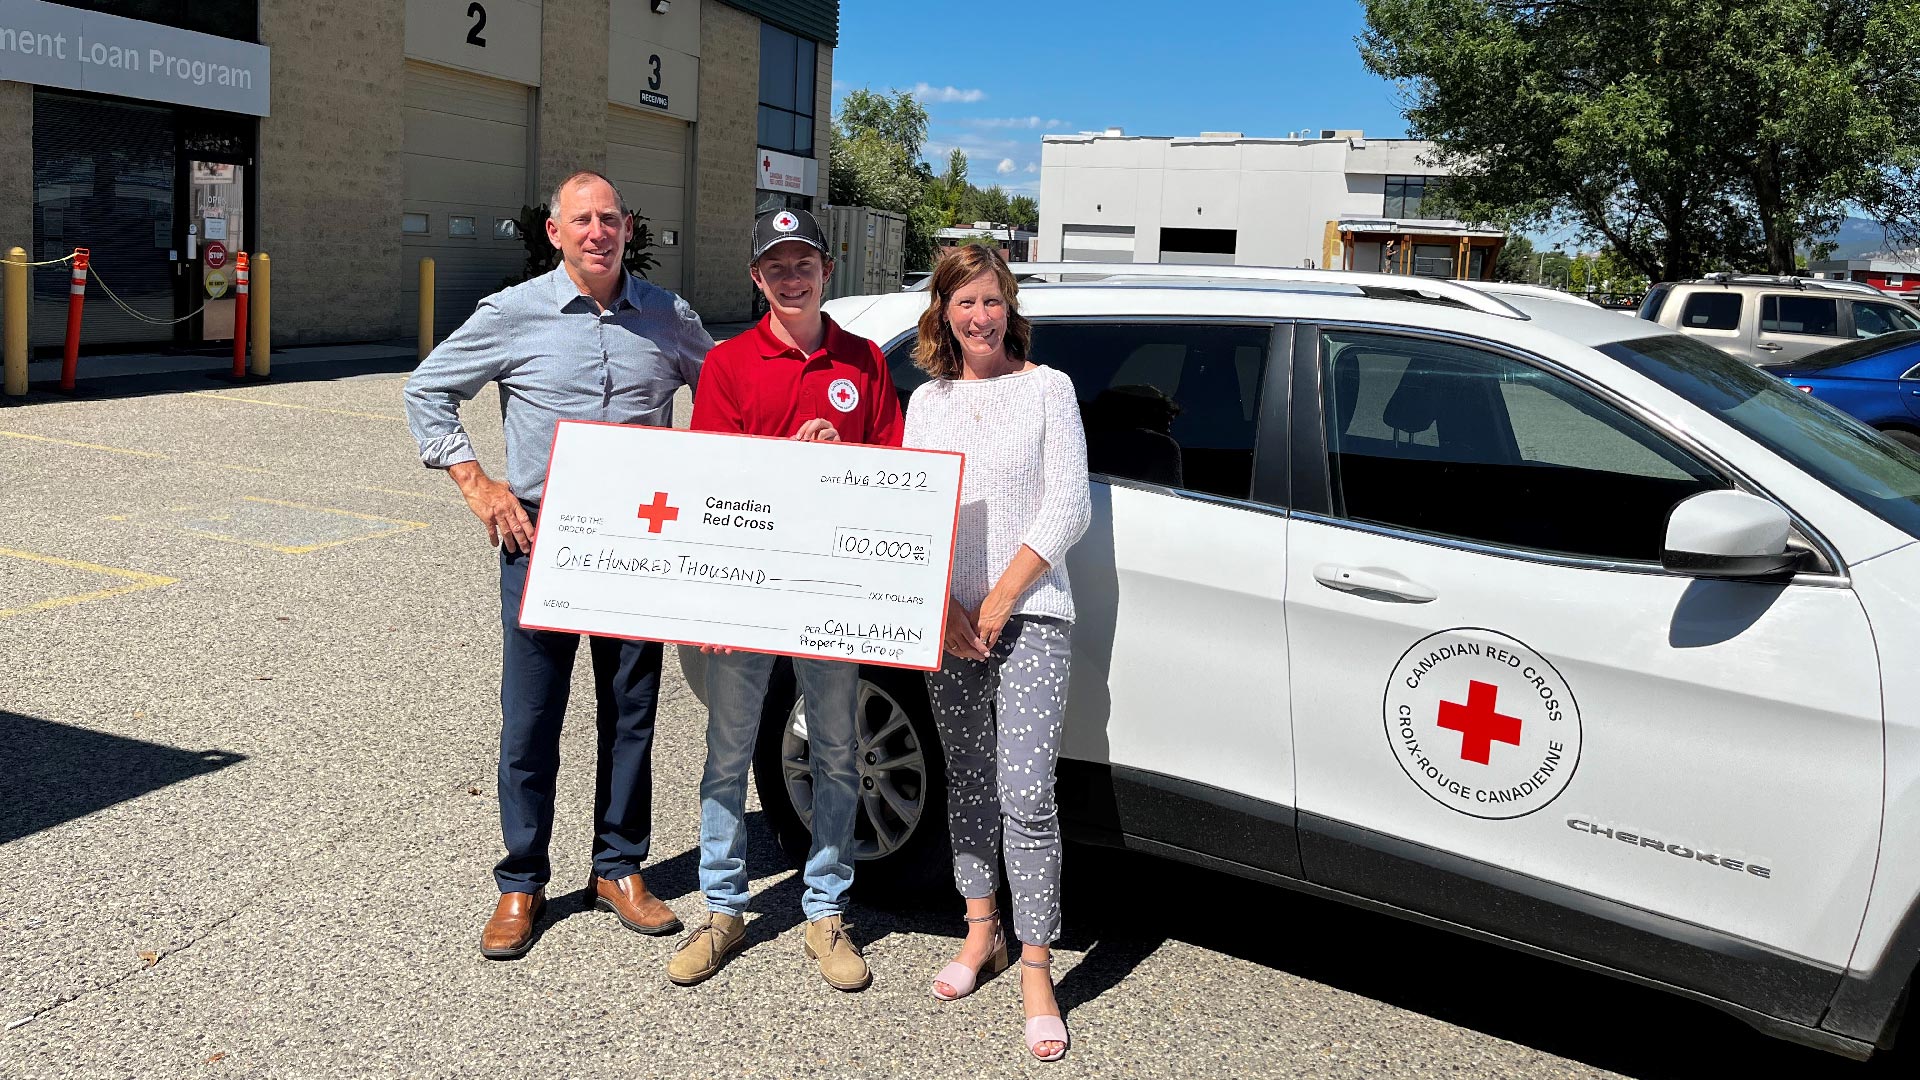 Callahan Property Group supports communities in Canada by investing in the Canadian Red Cross image